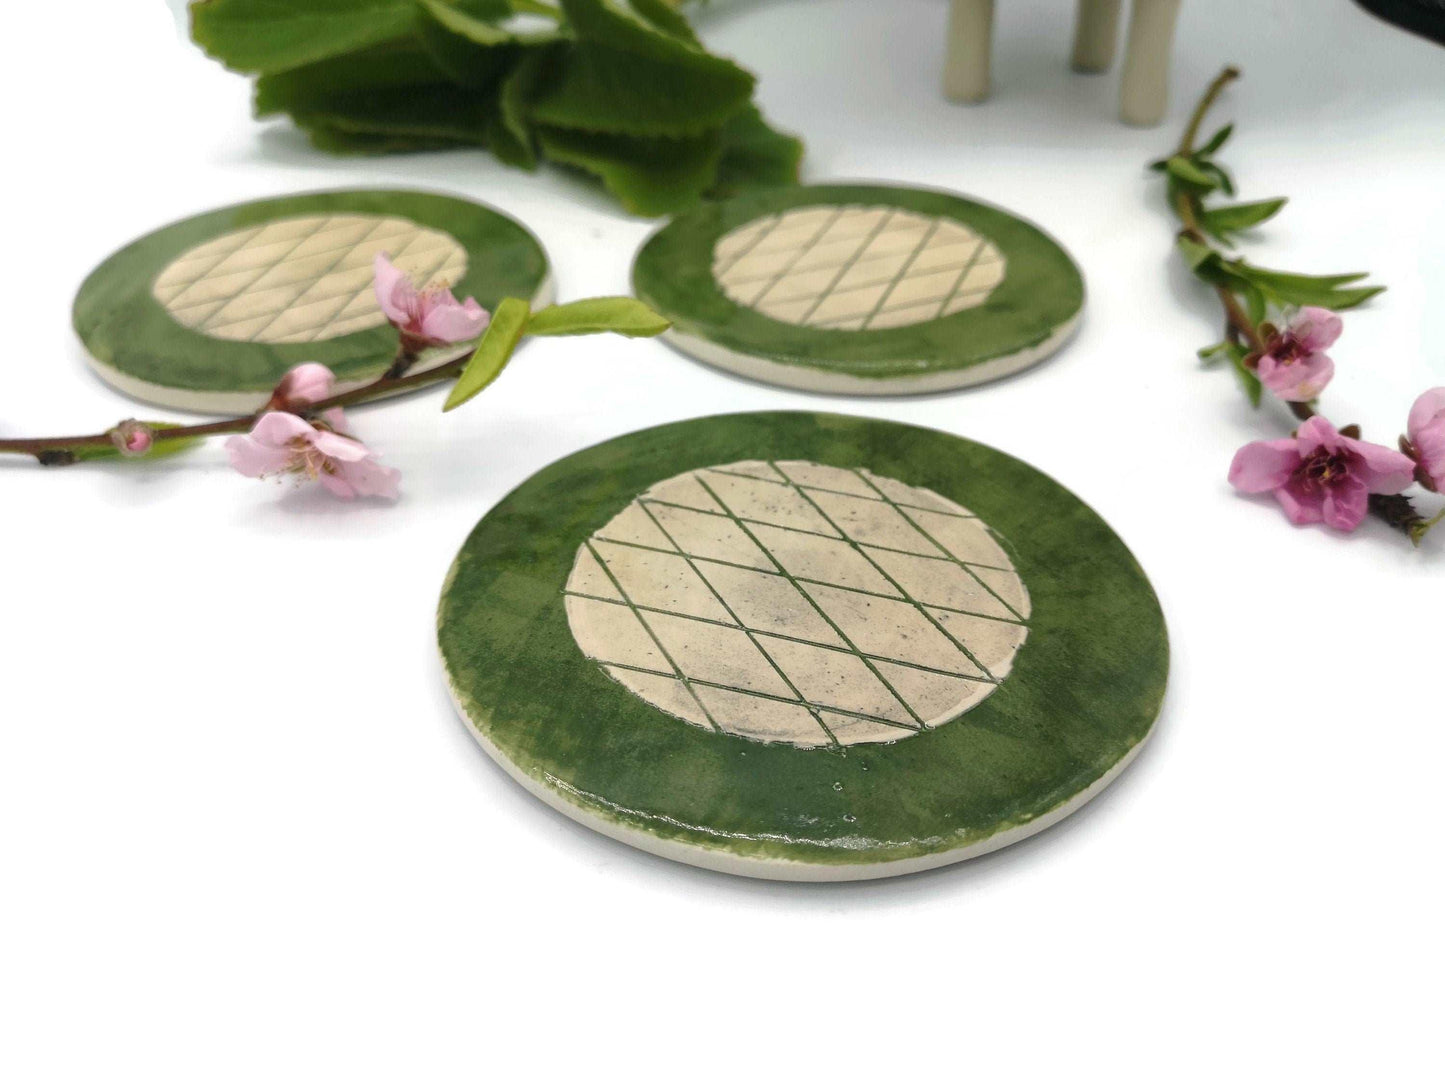 1Pc Handmade Ceramic Geometric Coaster For Drinks, Housewarming Gift First Home, Green Coasters Best Office Desk Accessories Gifts For Him